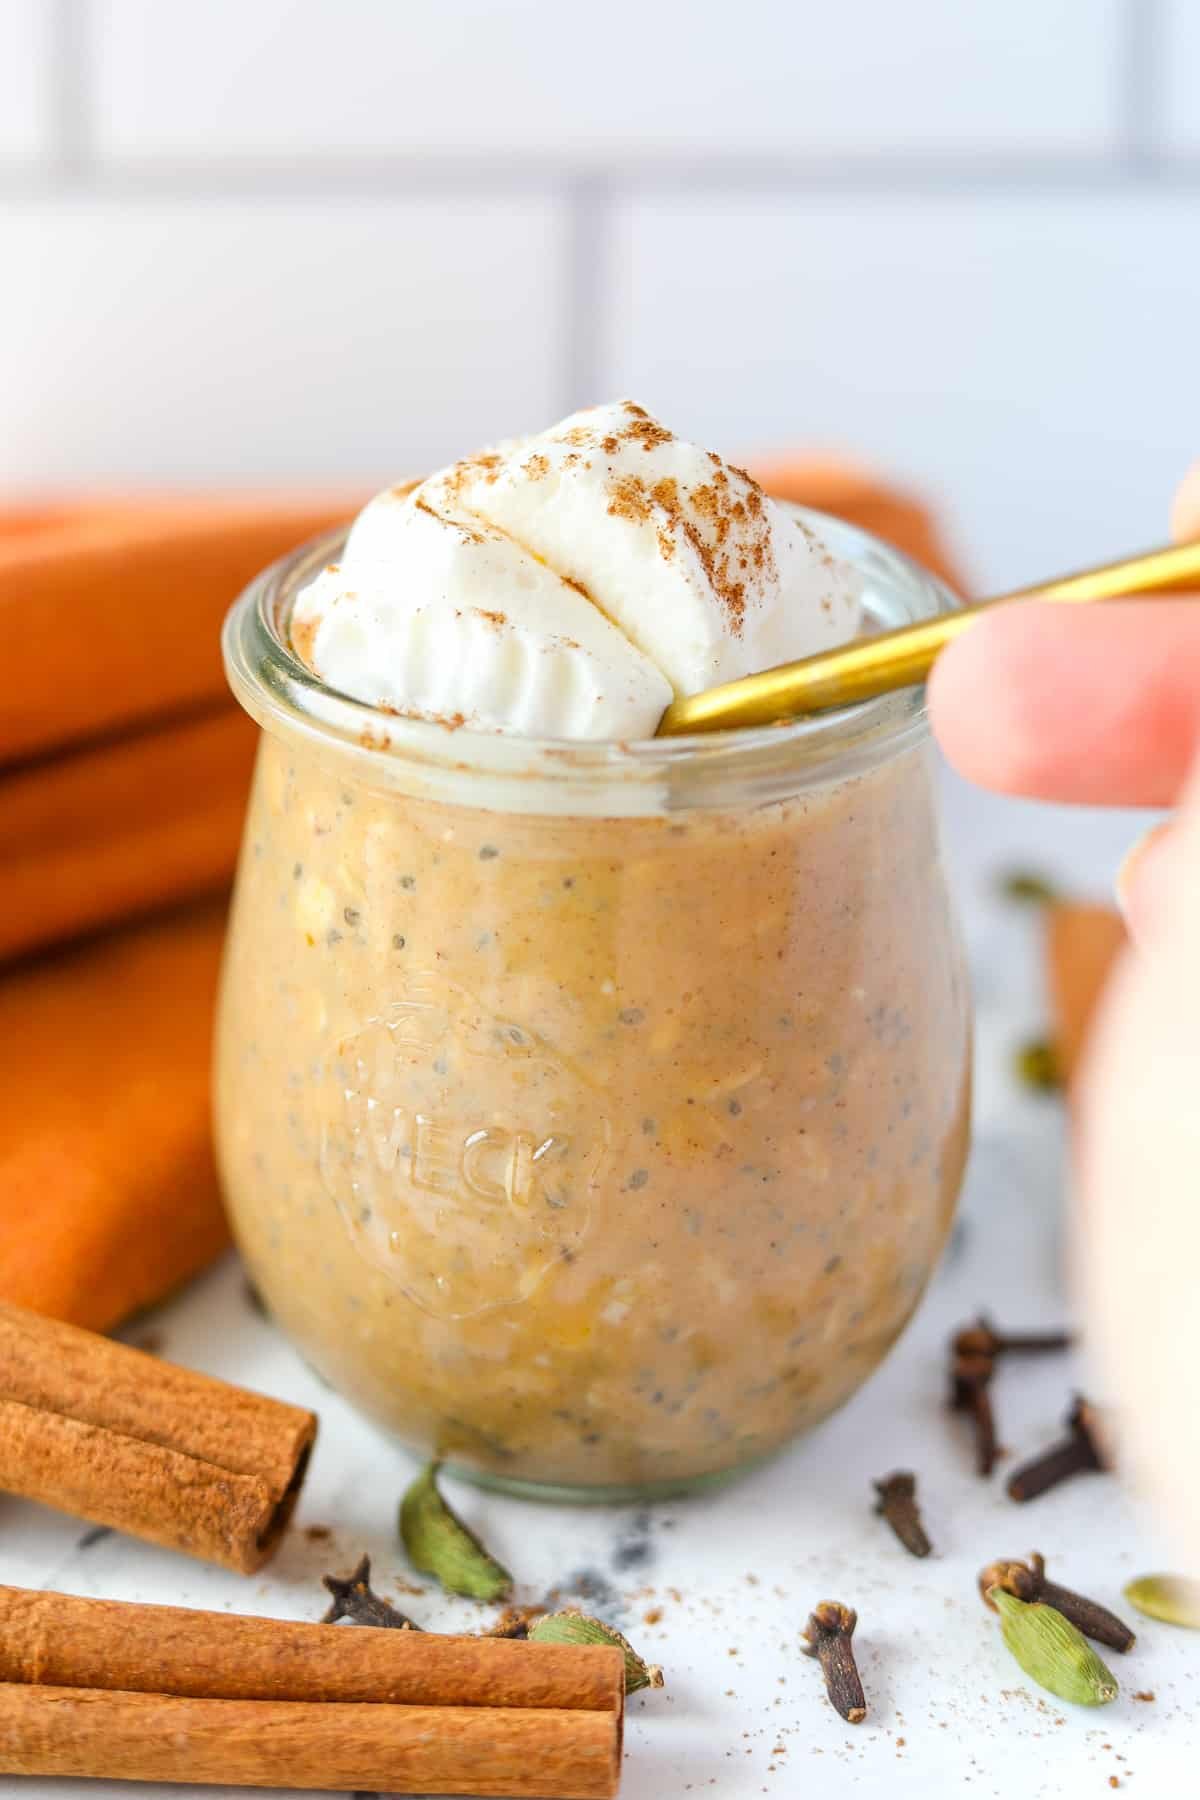 A spoon diving into a jar of overnight oats.